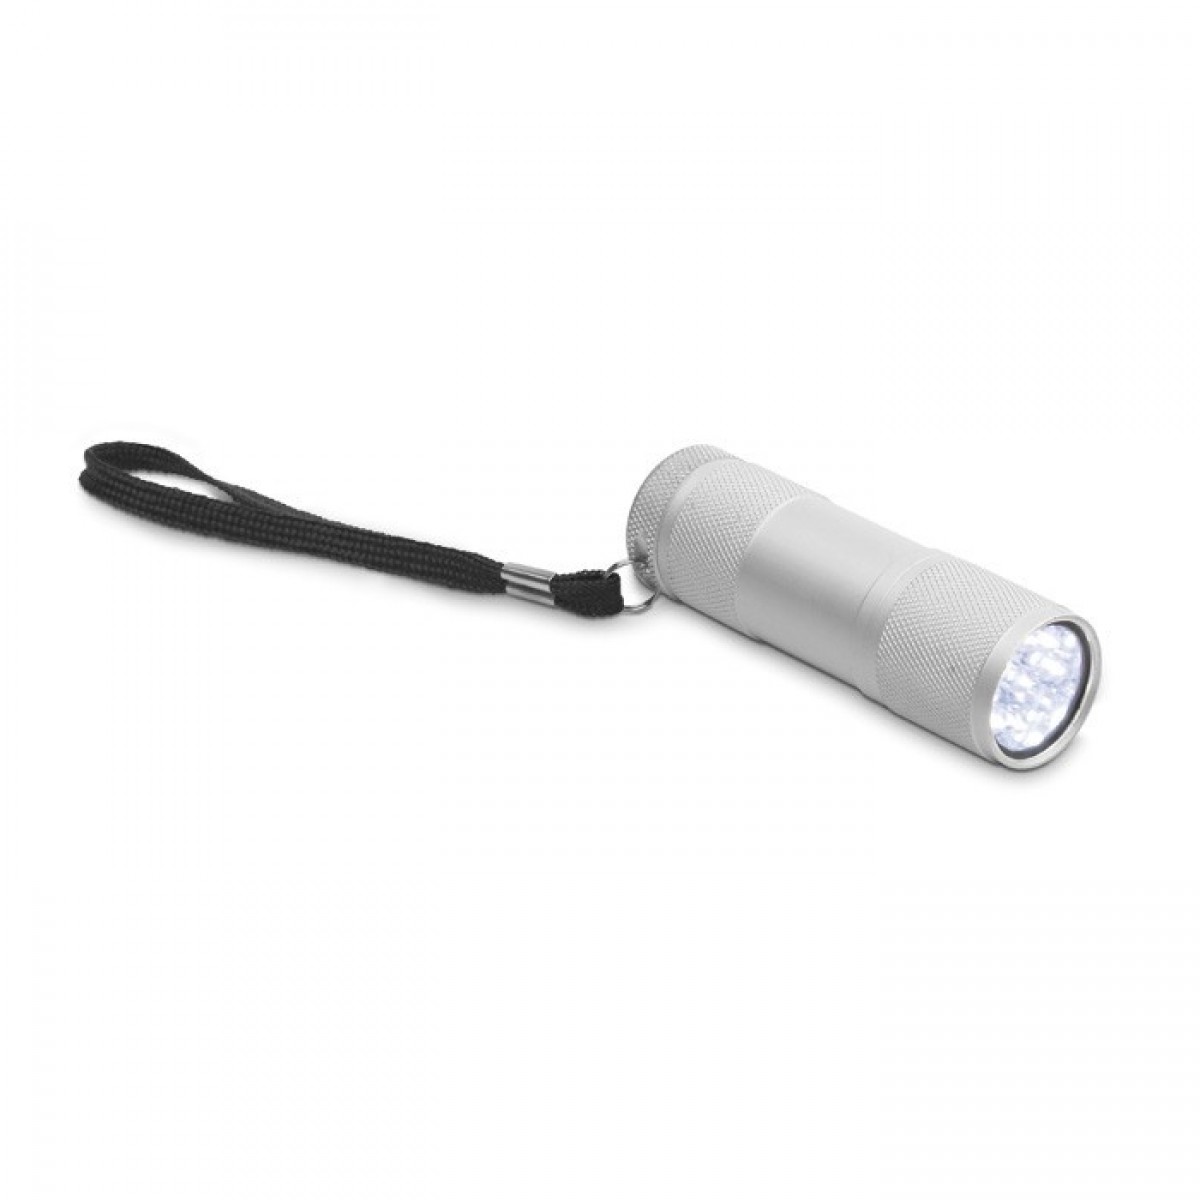 Branded LED torch in tin box